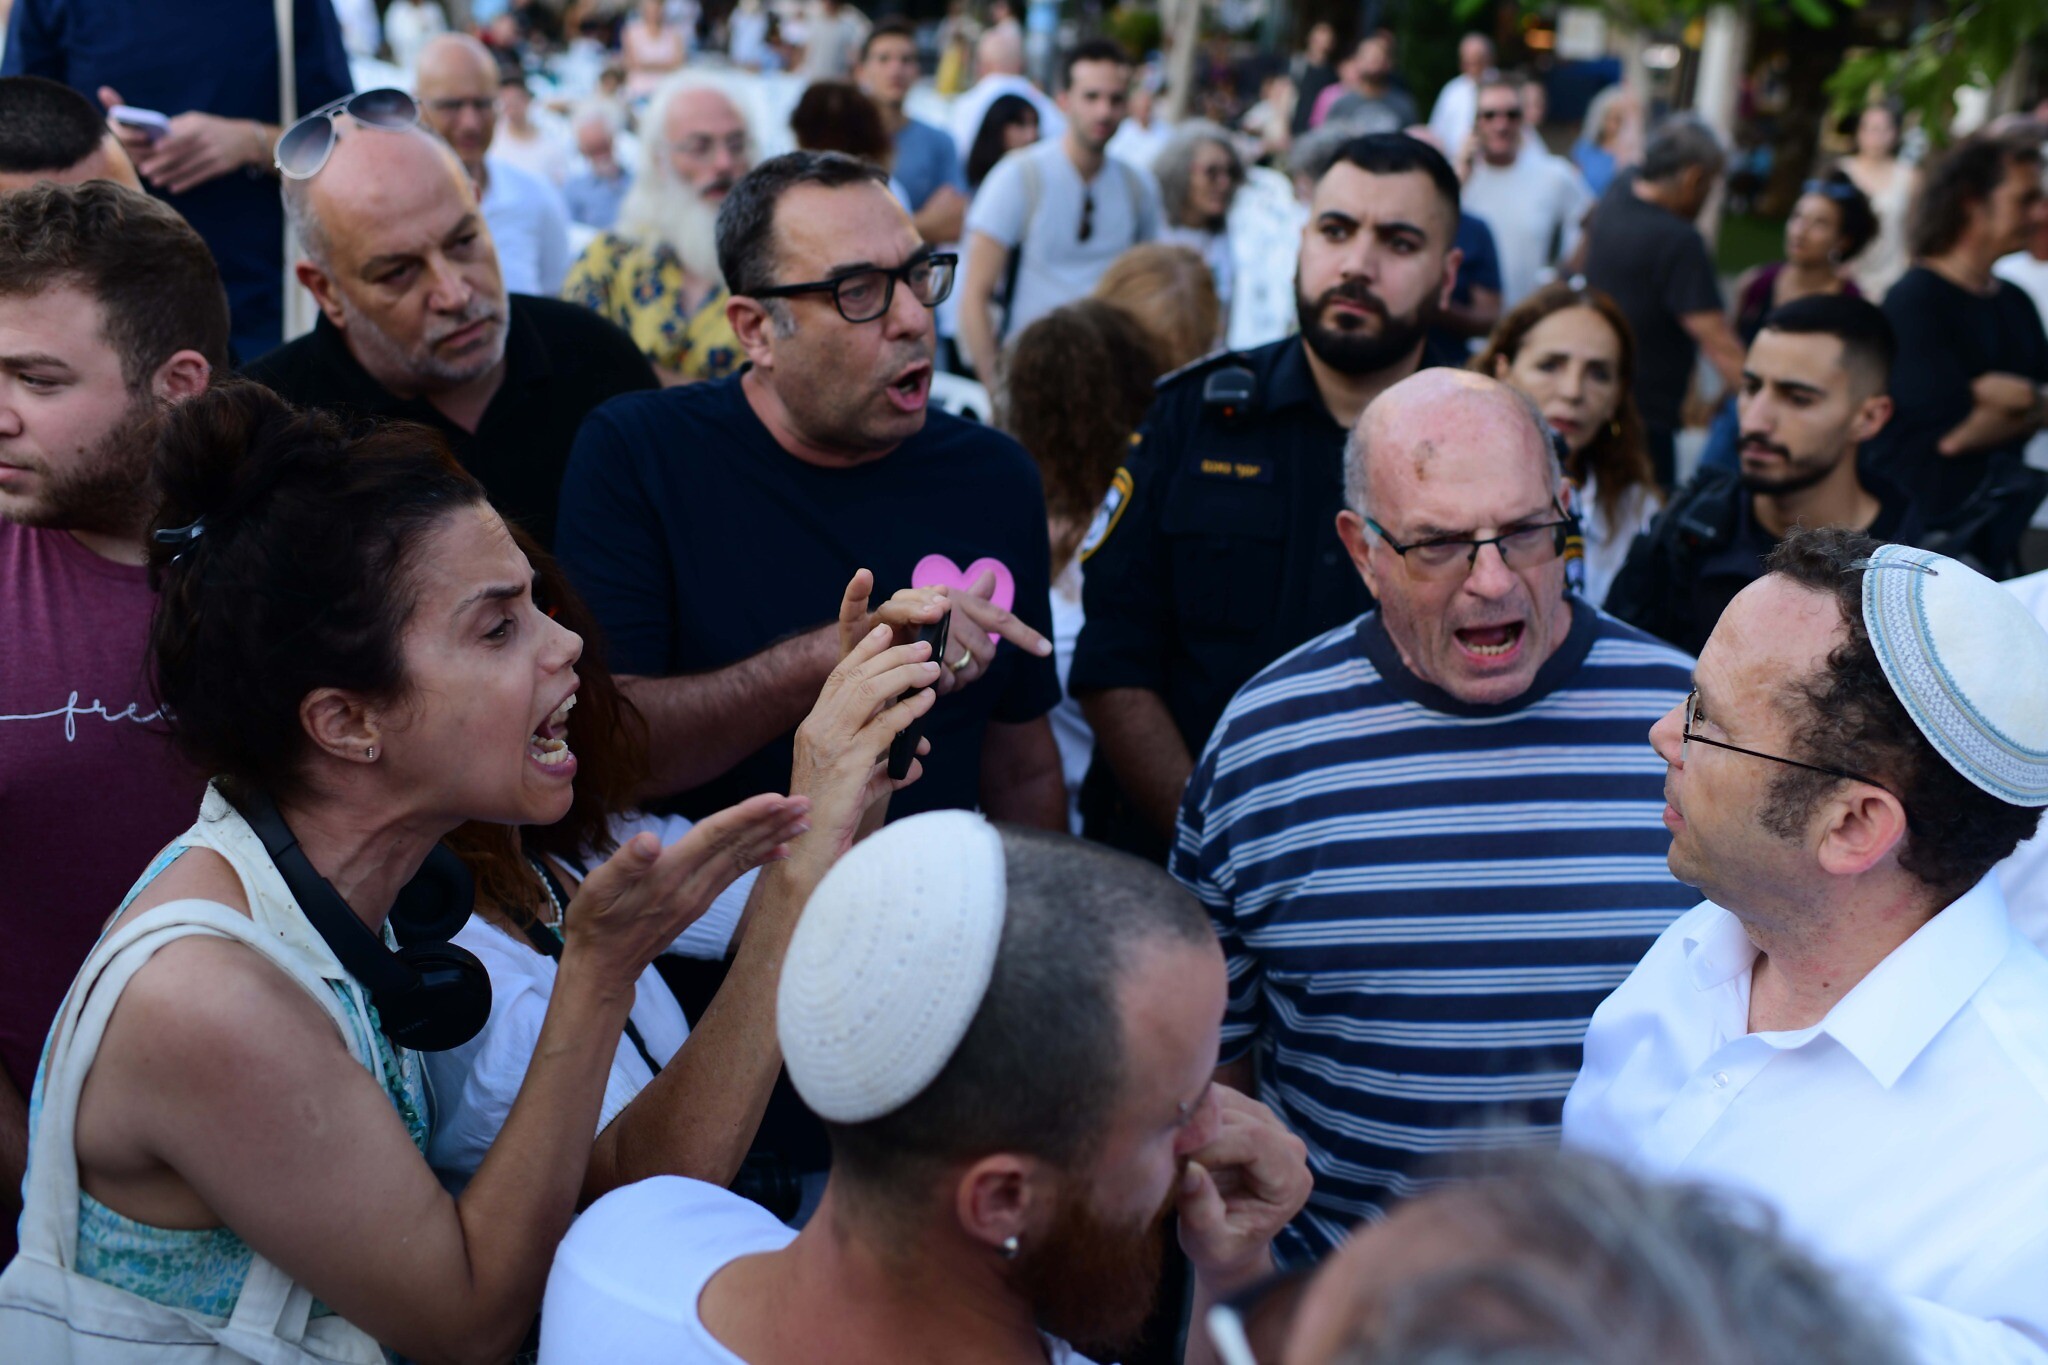 Protesters shout at Israel Zeira (right), founder of the Orthodox Jewish group Rosh Yehudi, which set up a gender divider for a public prayer event on Yom Kippur in Dizengoff Square in Tel Aviv, on September 24, 2023. (Tomer Neuberg/Flash 90)